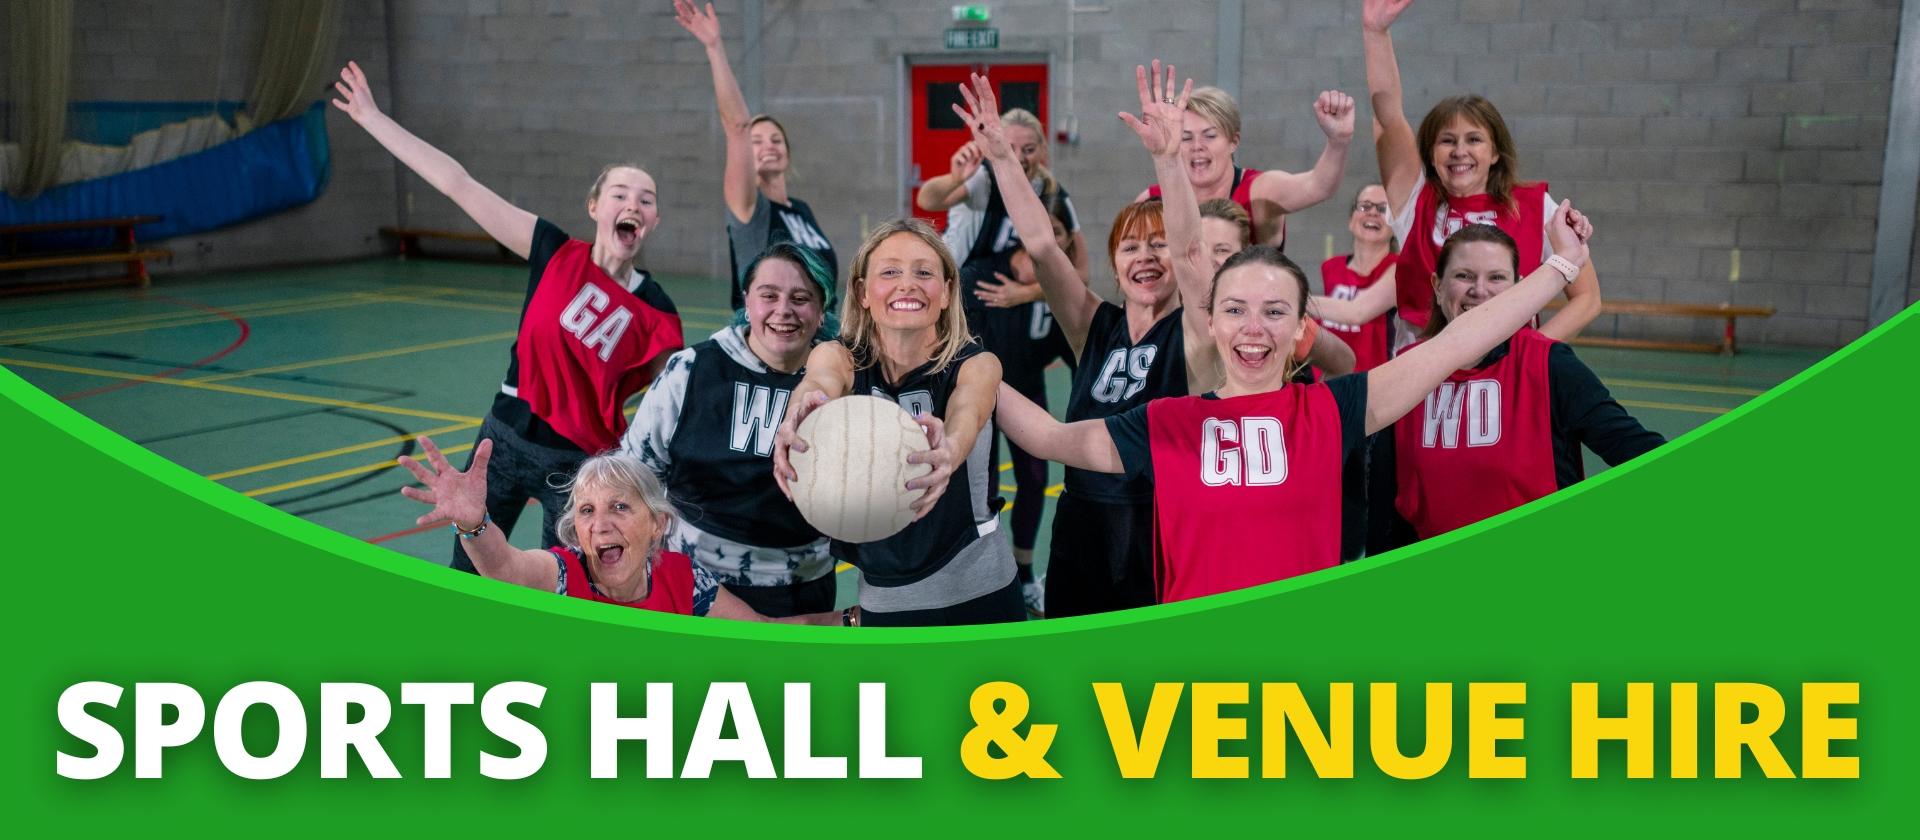 North Warwickshire leisure sports hall and venue hire